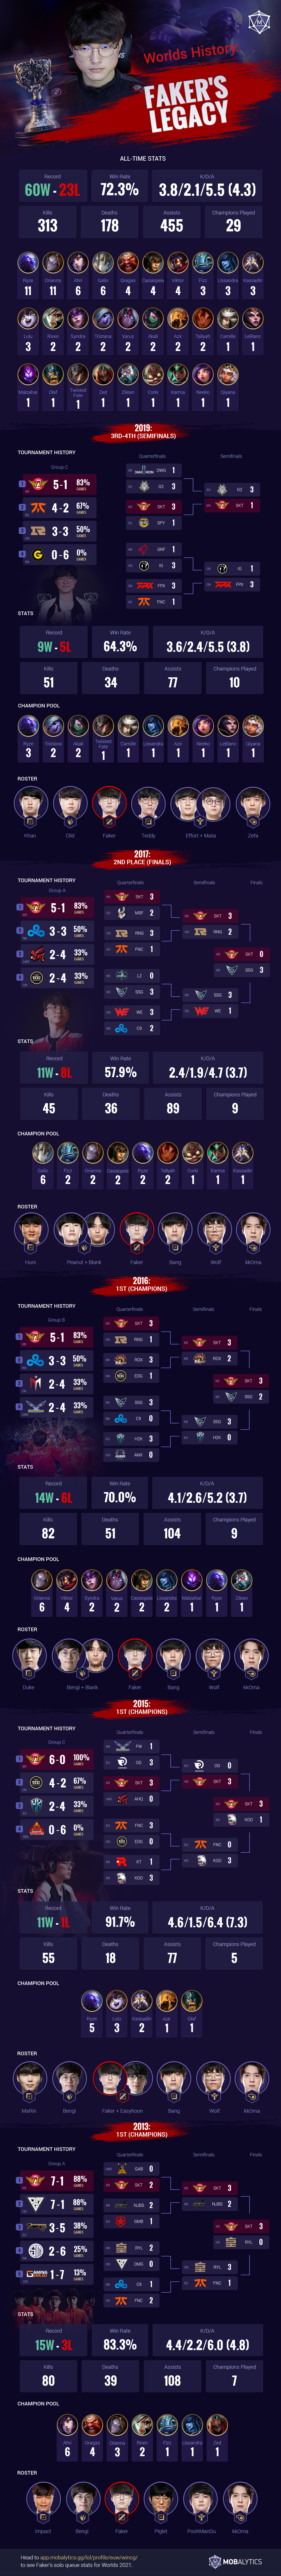 Faker’s Worlds Legacy: All-Time Records, Champion Pool Stats, and Teammates Throughout the Years